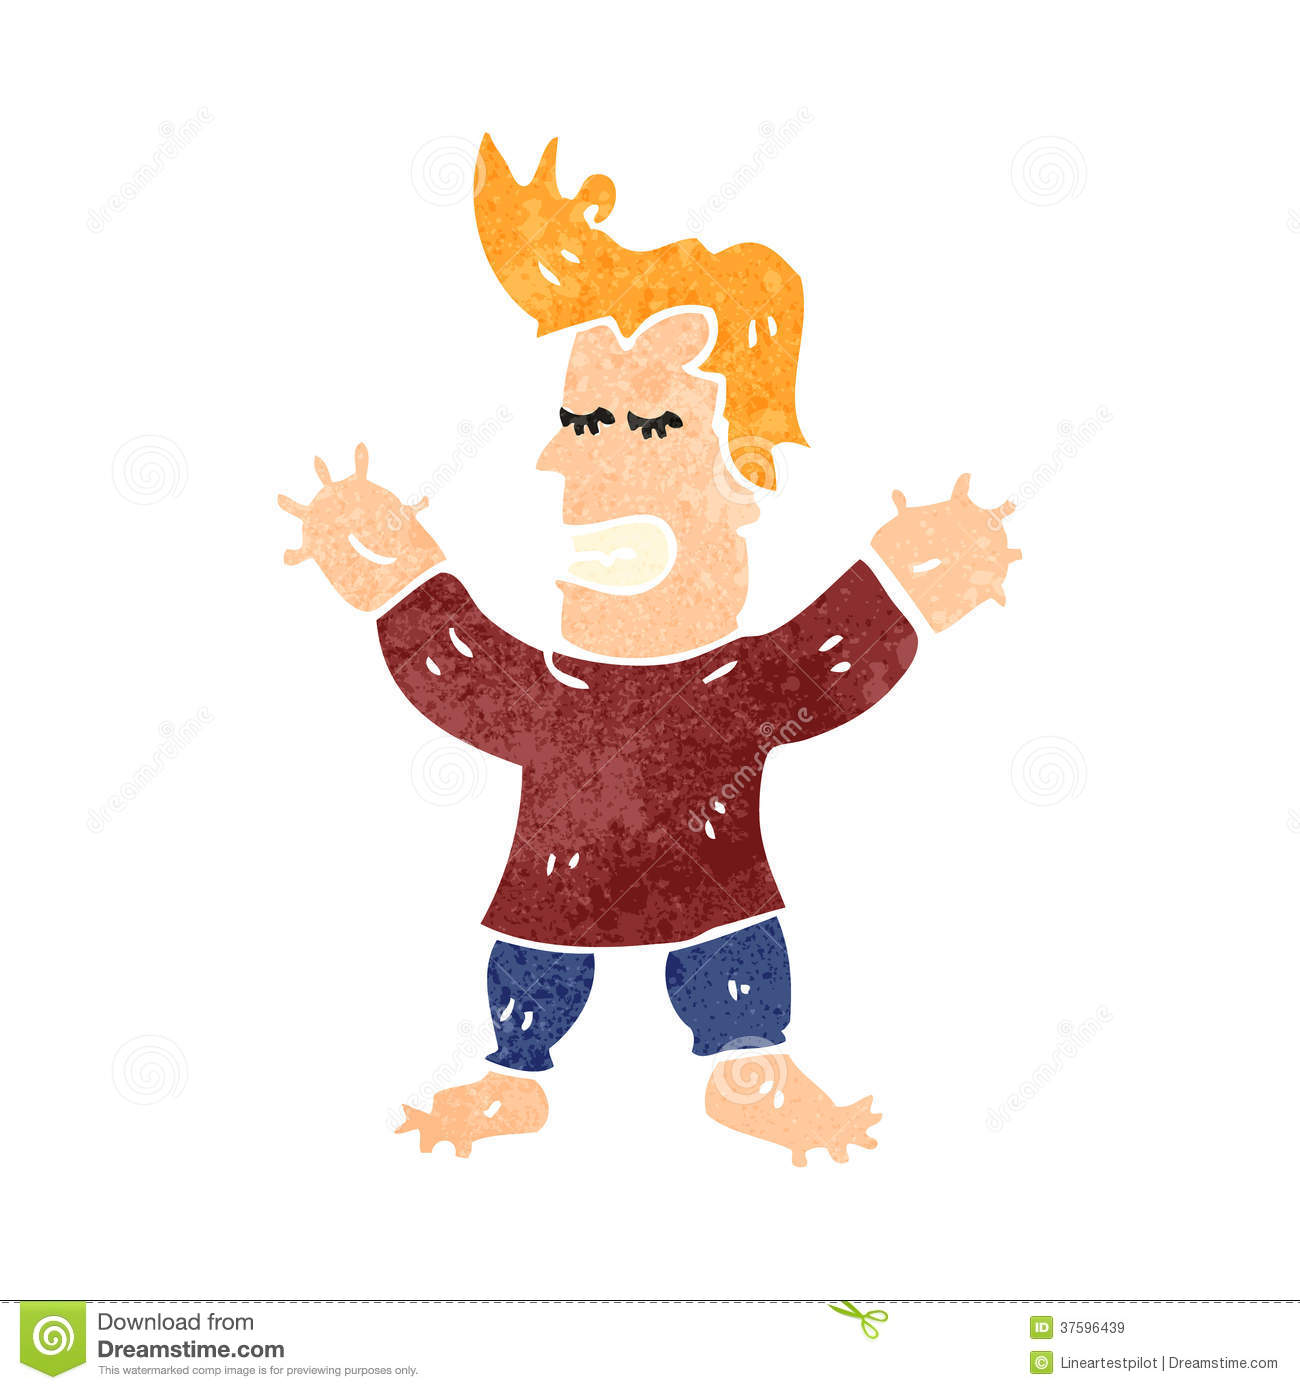 Retro Cartoon Man With Swollen Hands Royalty Free Stock Images   Image